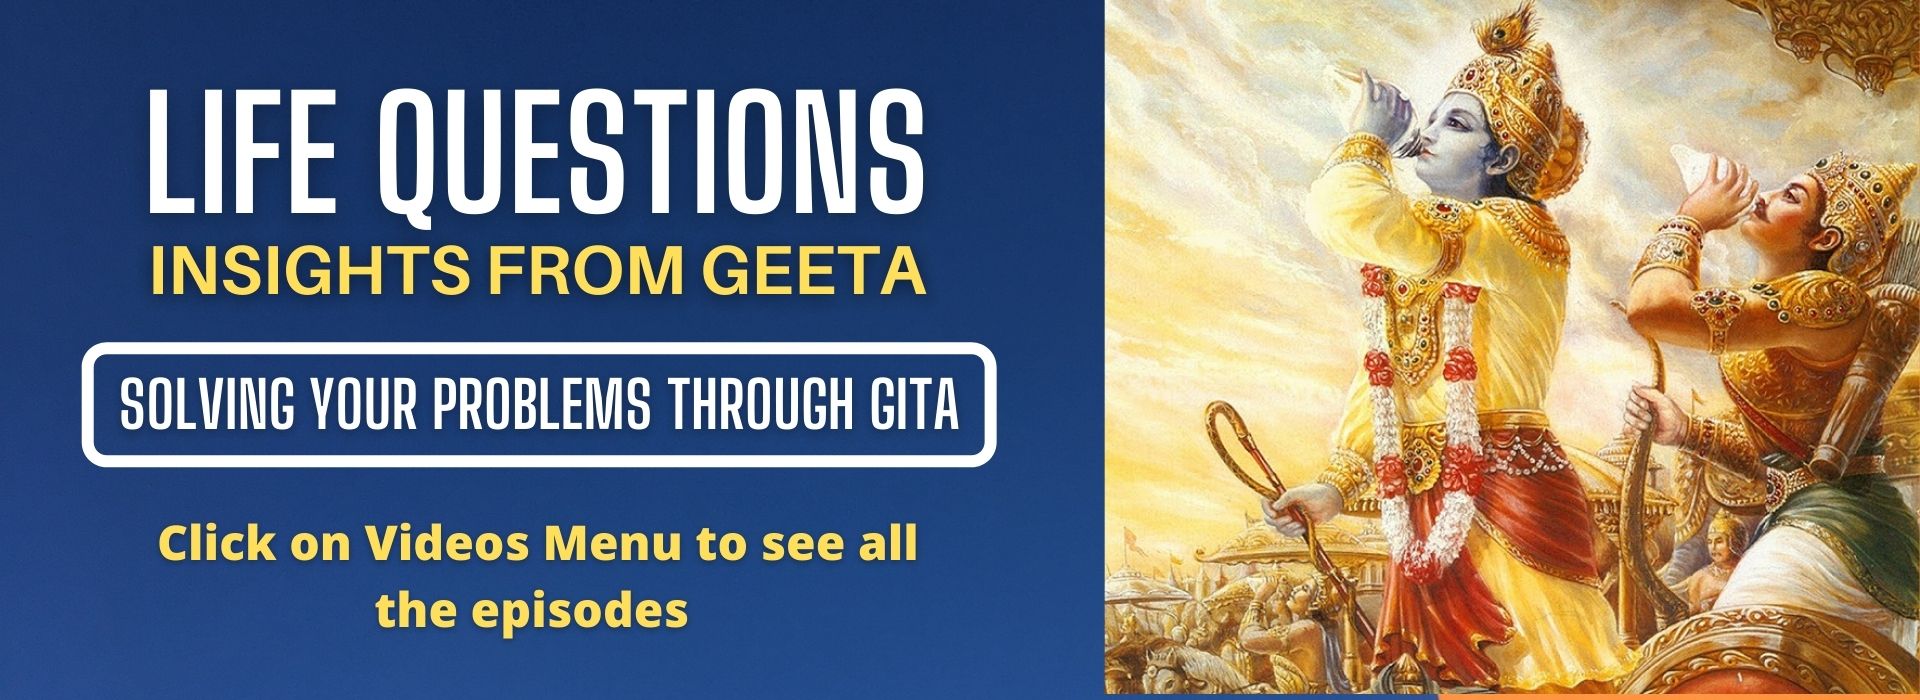 Ask questions, Get Answers !! Straight from the wisdom of Shrimad Bhagavad Gita